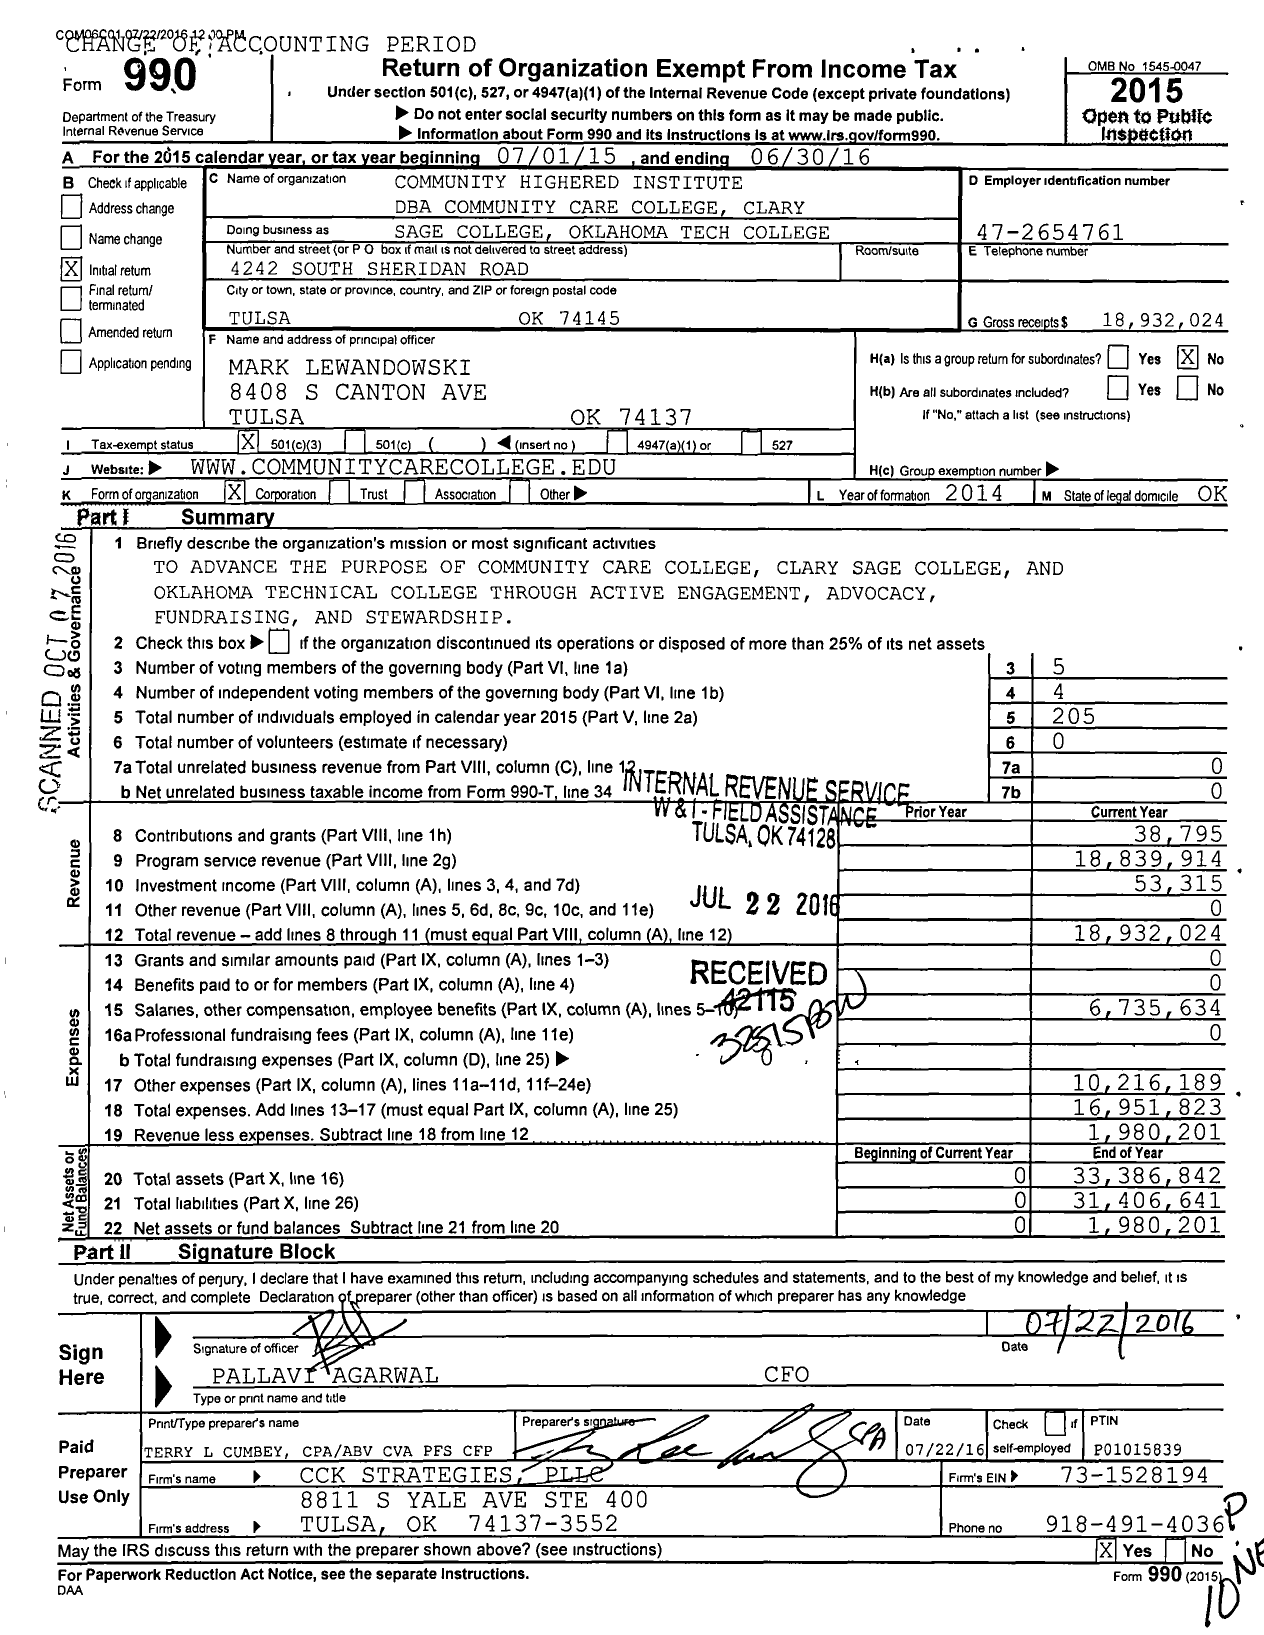 Image of first page of 2015 Form 990 for Sage College Oklahoma Tech College